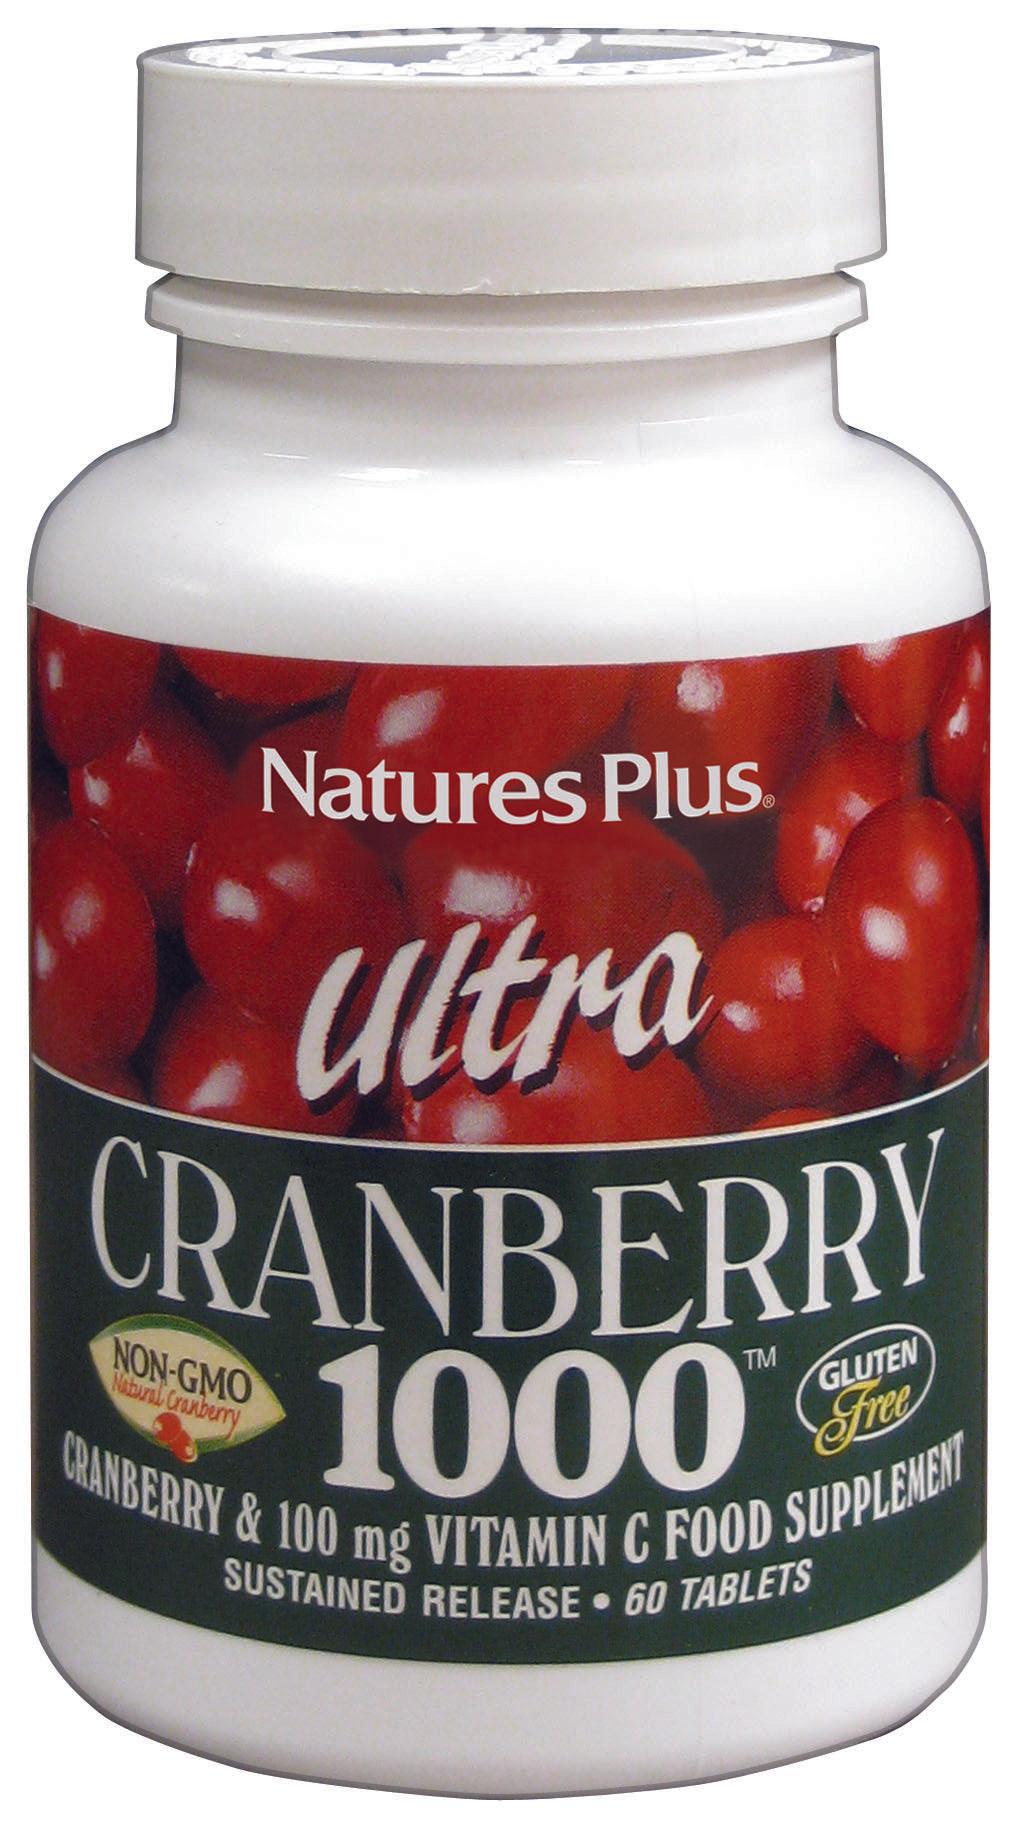 Nature's Plus Ultra Cranberry 1000 60's - Approved Vitamins